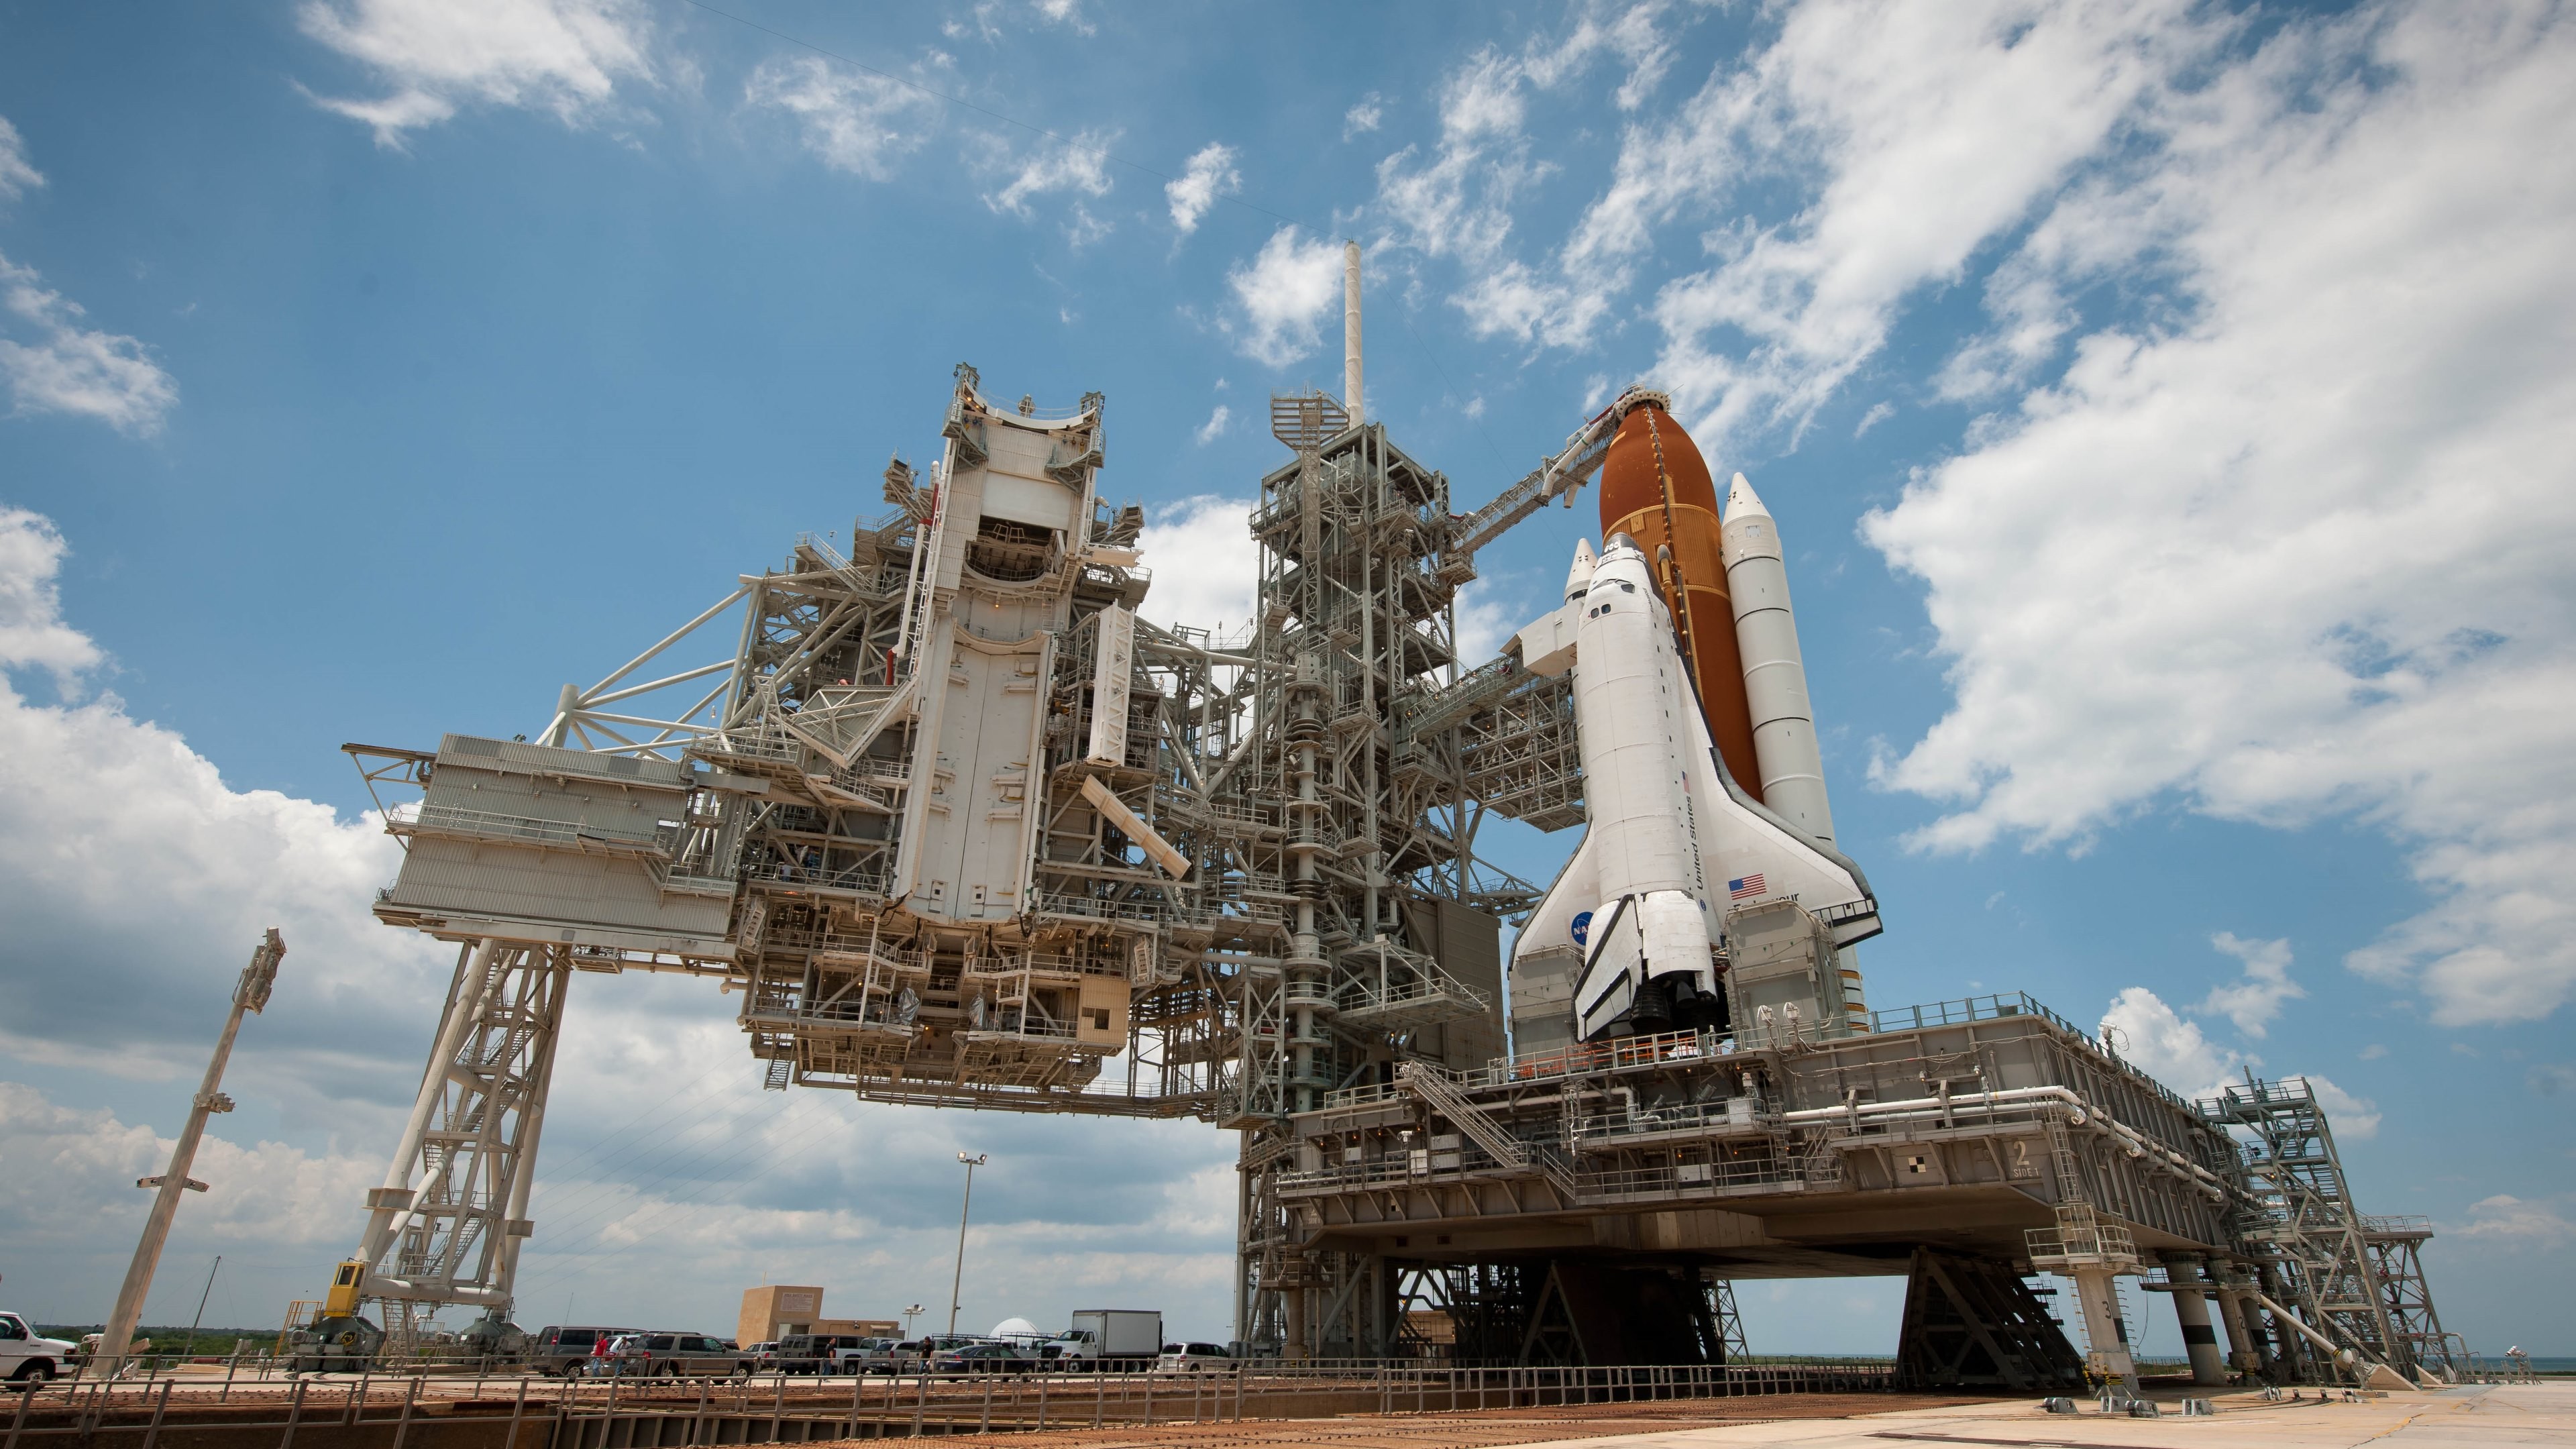 3840x2160 Wallpaper: Endeavour Space Shuttle on launch pad. Ultra HD 4K 